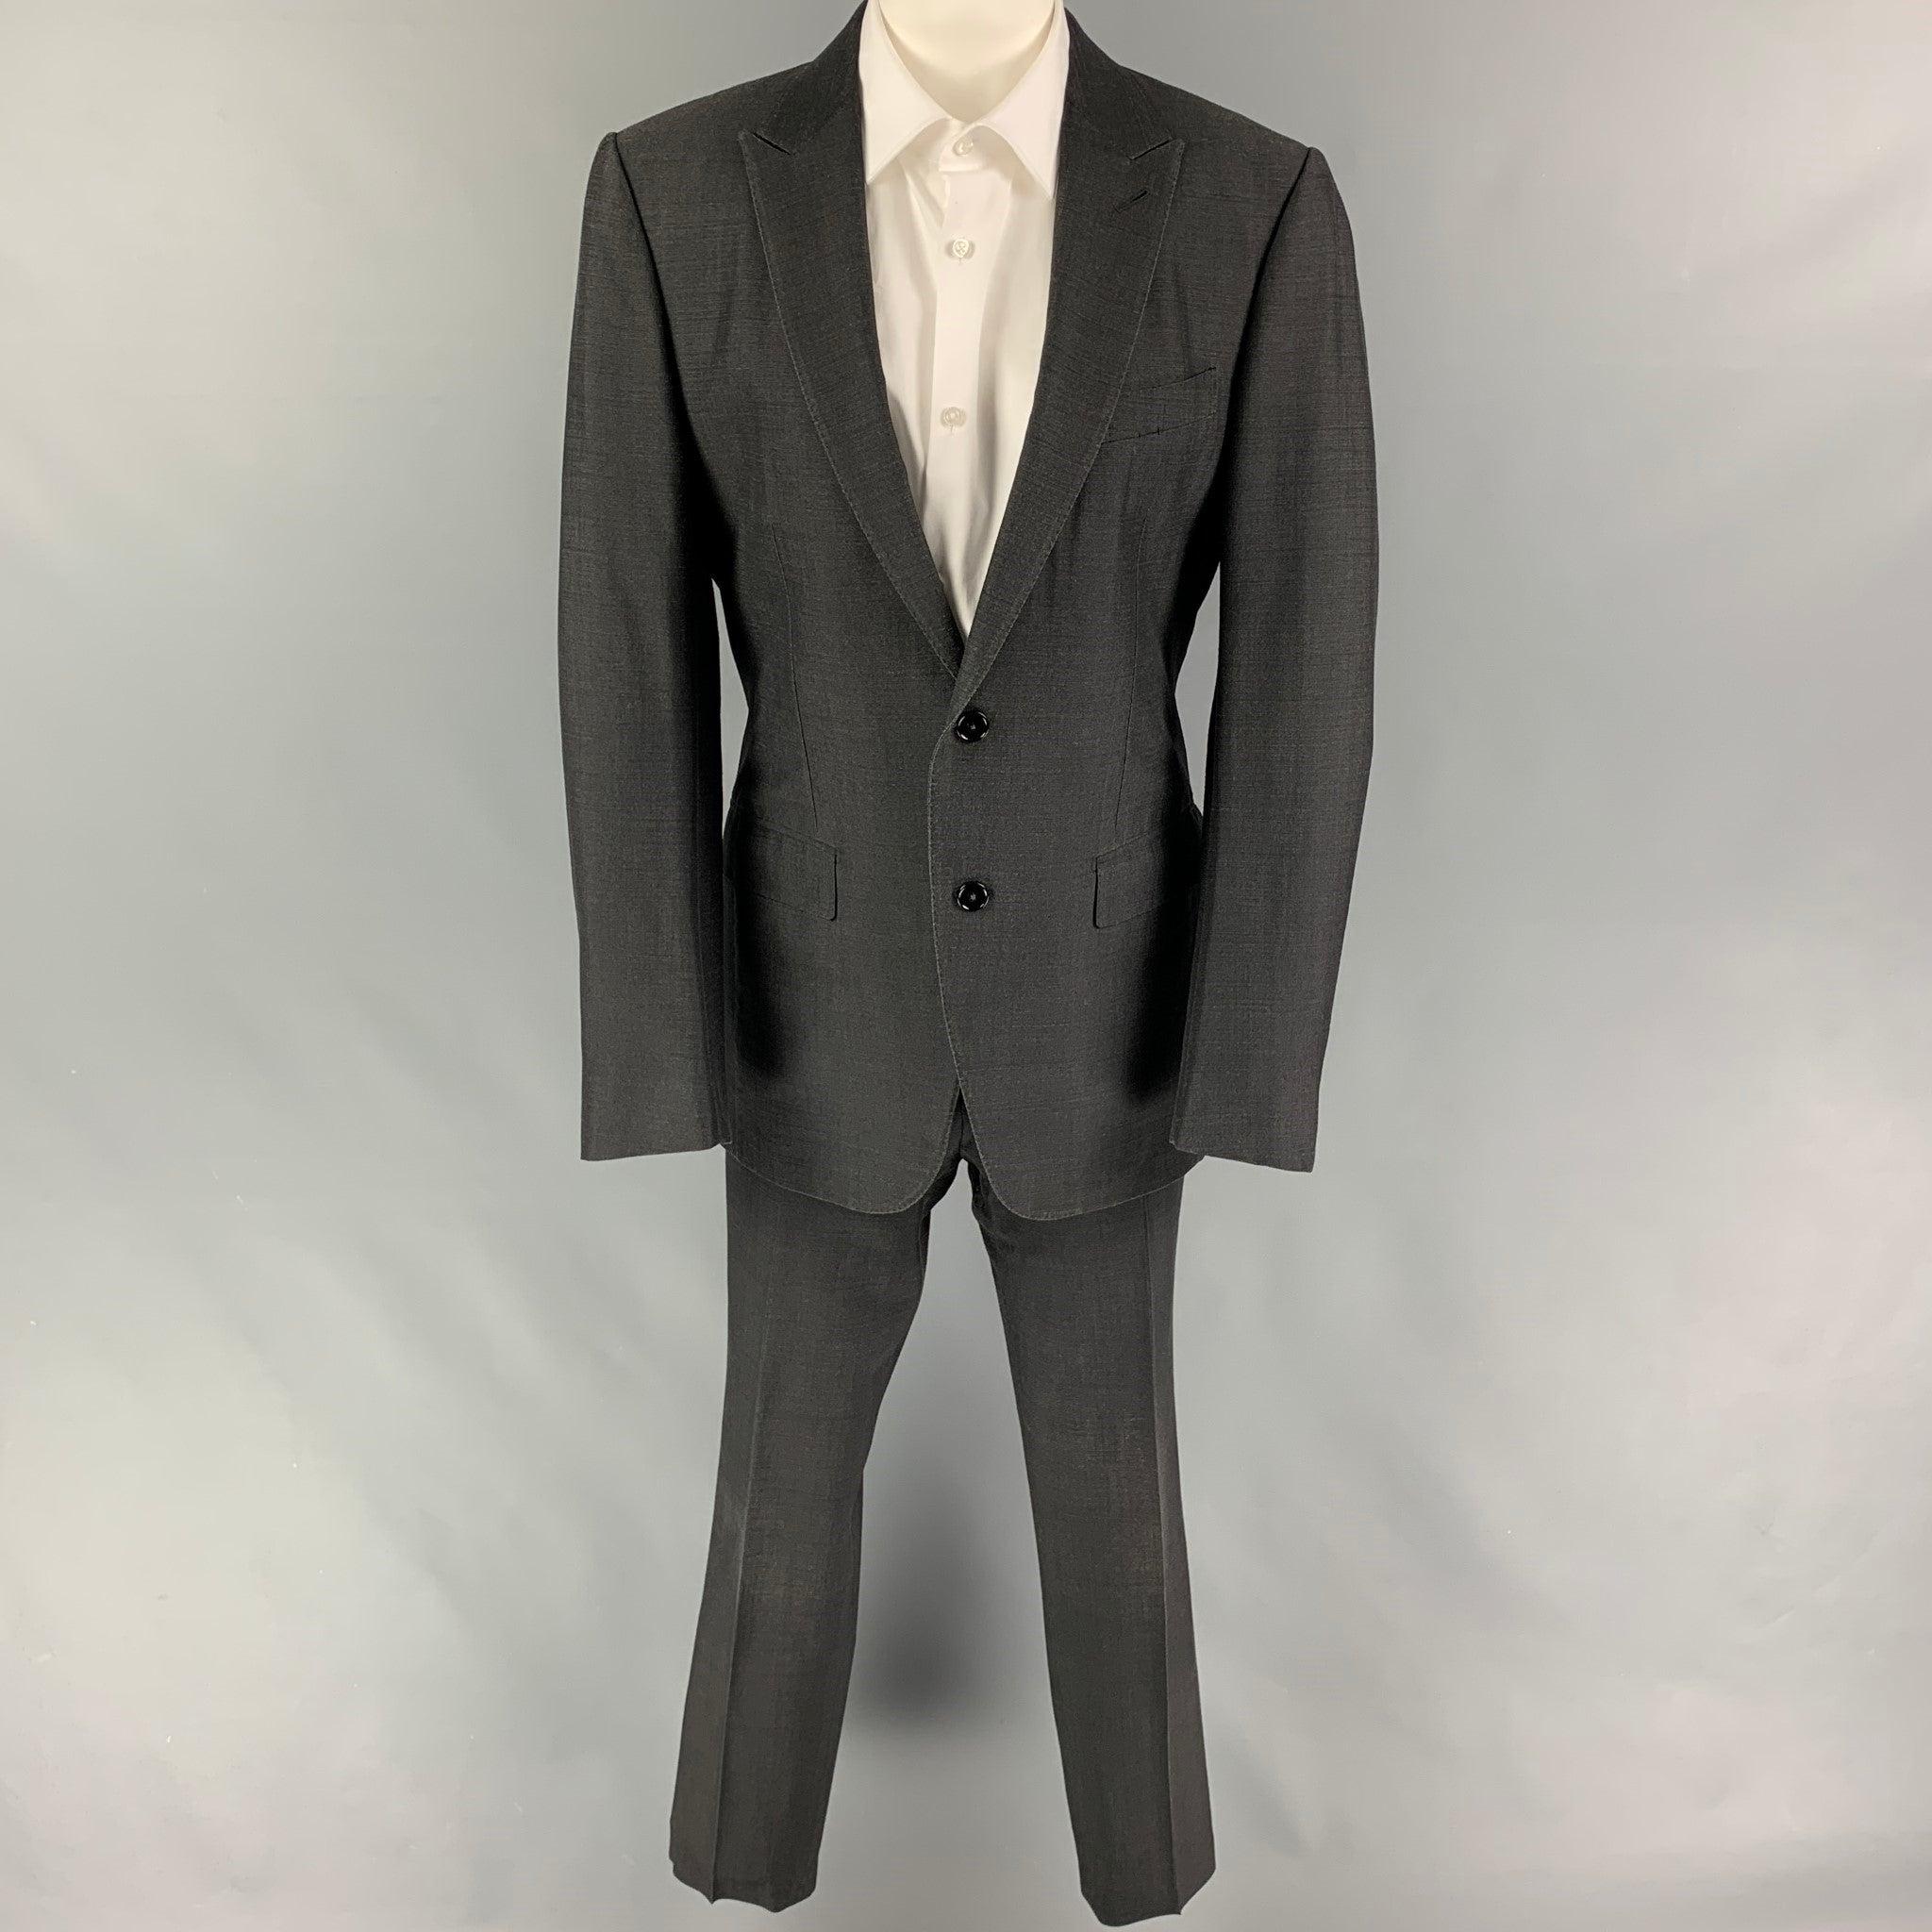 ERMENEGILDO ZEGNA
suit comes in a charcoal silk / wool and includes a single breasted, double button sport coat with a peak lapel and matching flat front trousers. Very Good Pre-Owned Condition. 

Marked:   50 R  

Measurements: 
  -JacketShoulder: